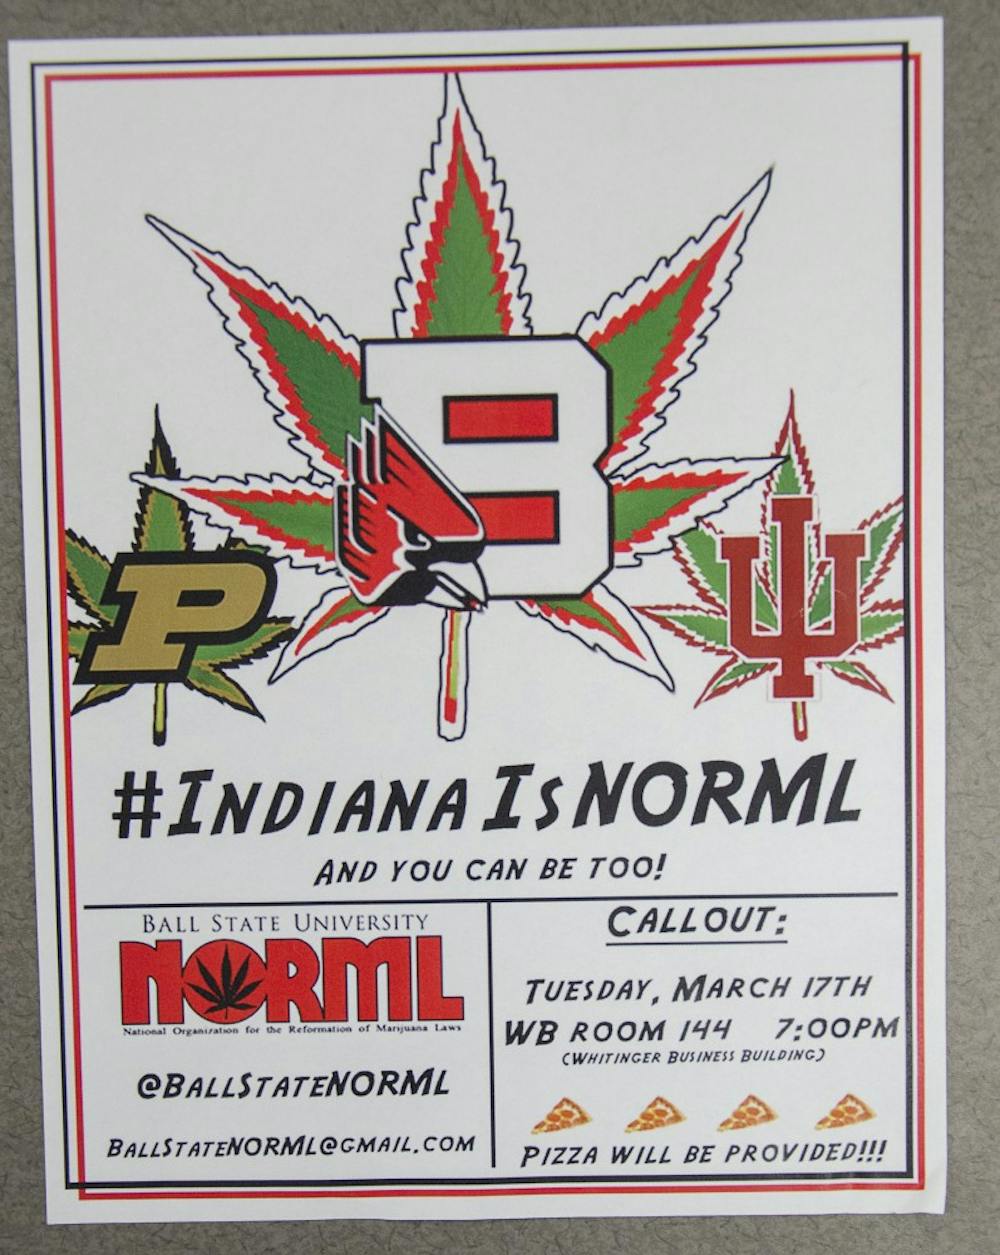 <p>Purdue junior Chris Thompson is starting a Ball State chapter of NORML and is working on starting chapters at Indiana University and Indiana University-Purdue University. NORML stands for the National Organization for the Reformation of Marijuana Laws and aims to legalize marijuana. <i>DN PHOTO</i></p>